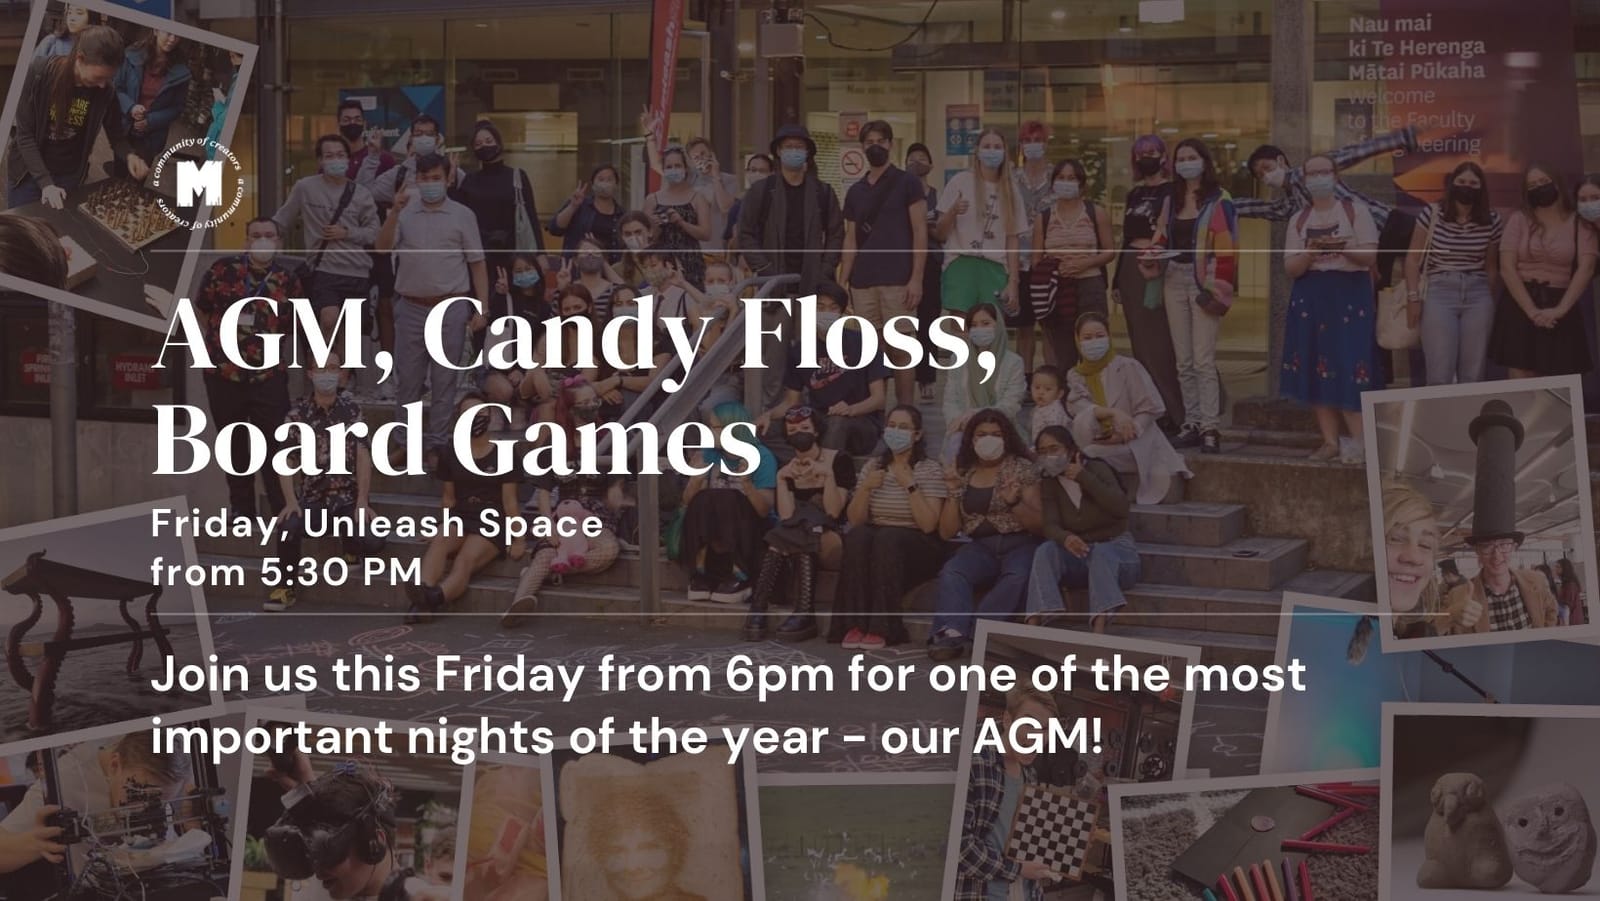 This Friday: AGM, Candy Floss, Board Games